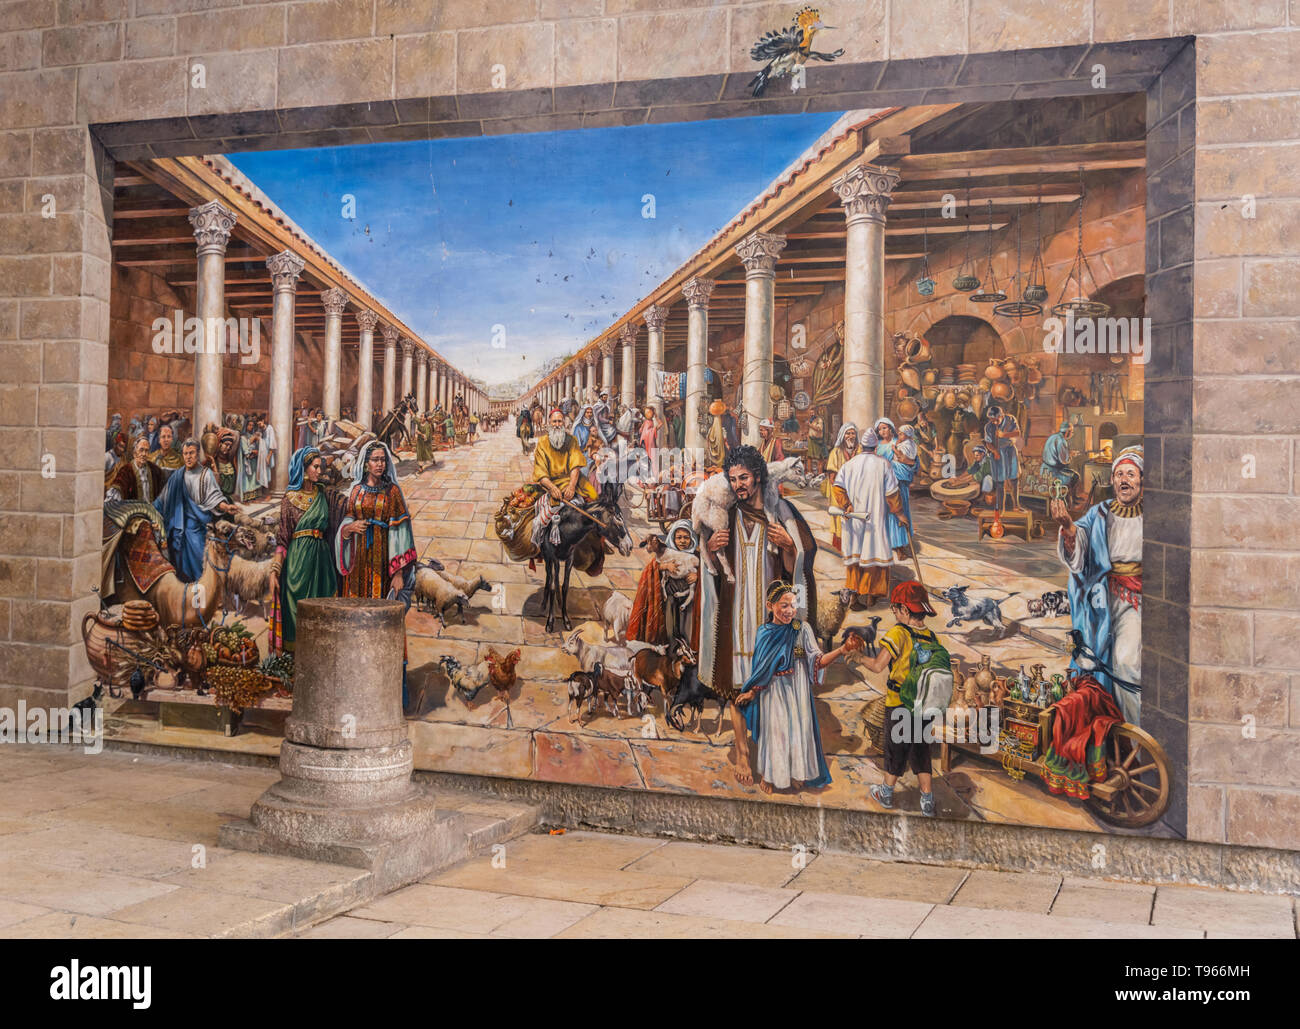 Israel Jerusalem Old City modern contemporary mural painting of The Cardo in Roman times Stock Photo